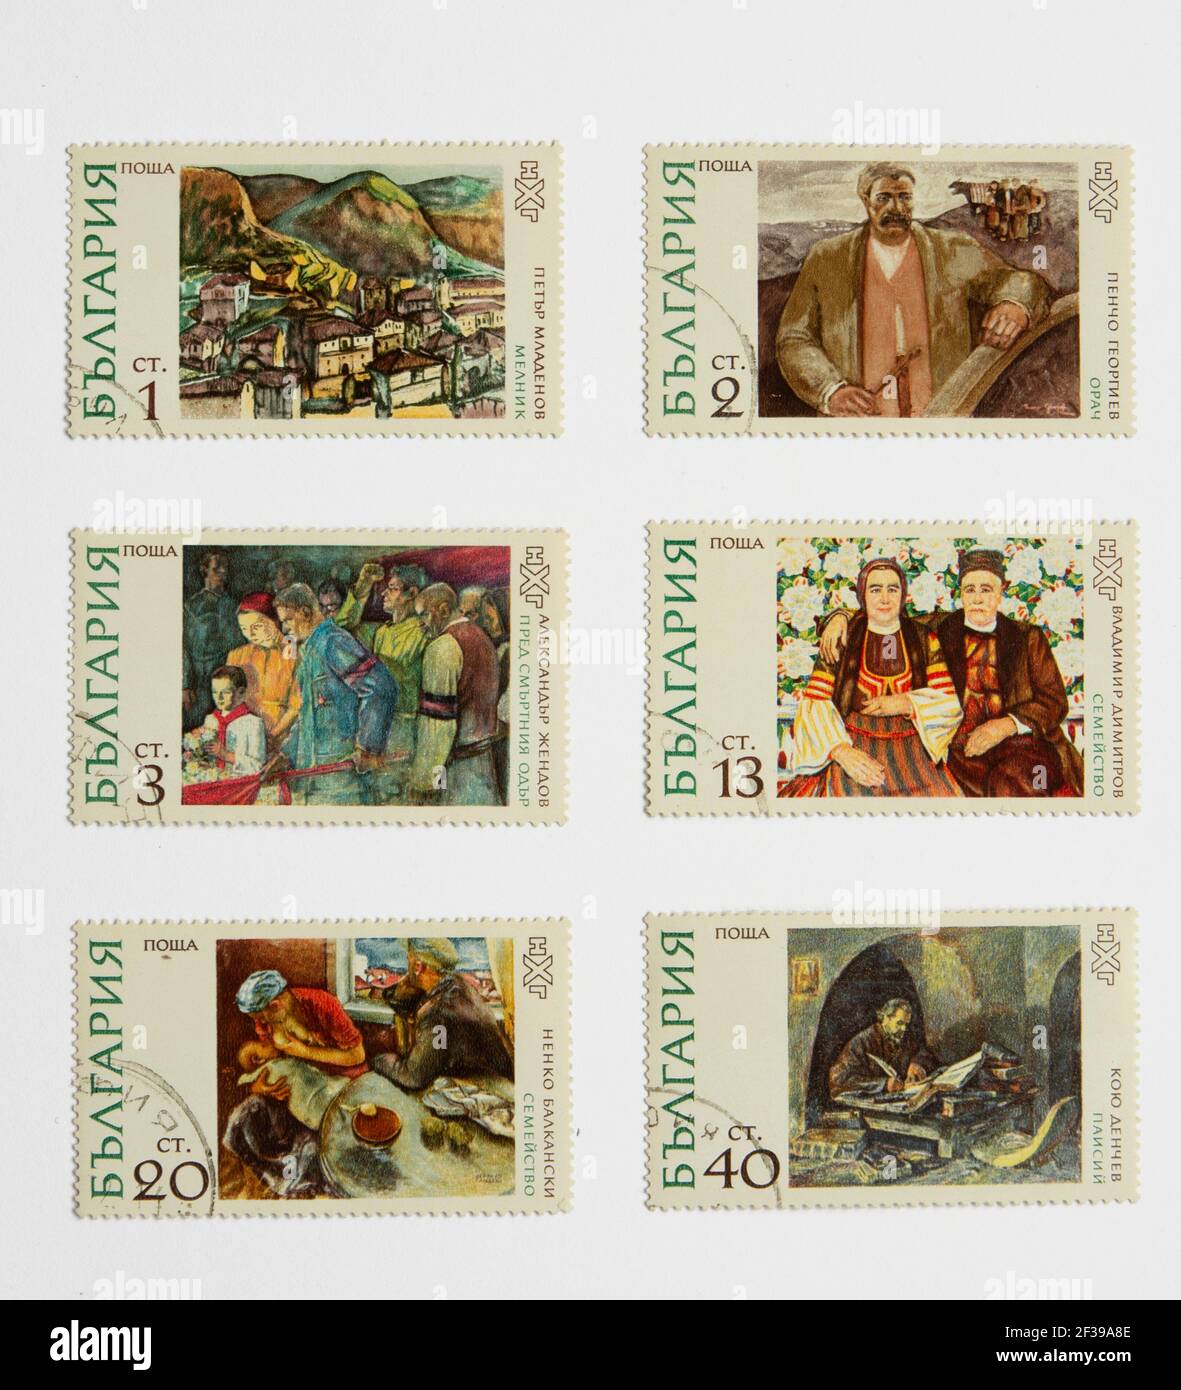 05.03.2021 Istanbul Turkey circa 1972 a stamp printed in bulgaria shows the plower by pencho georgiev, from national art gallery series of painting Stock Photo